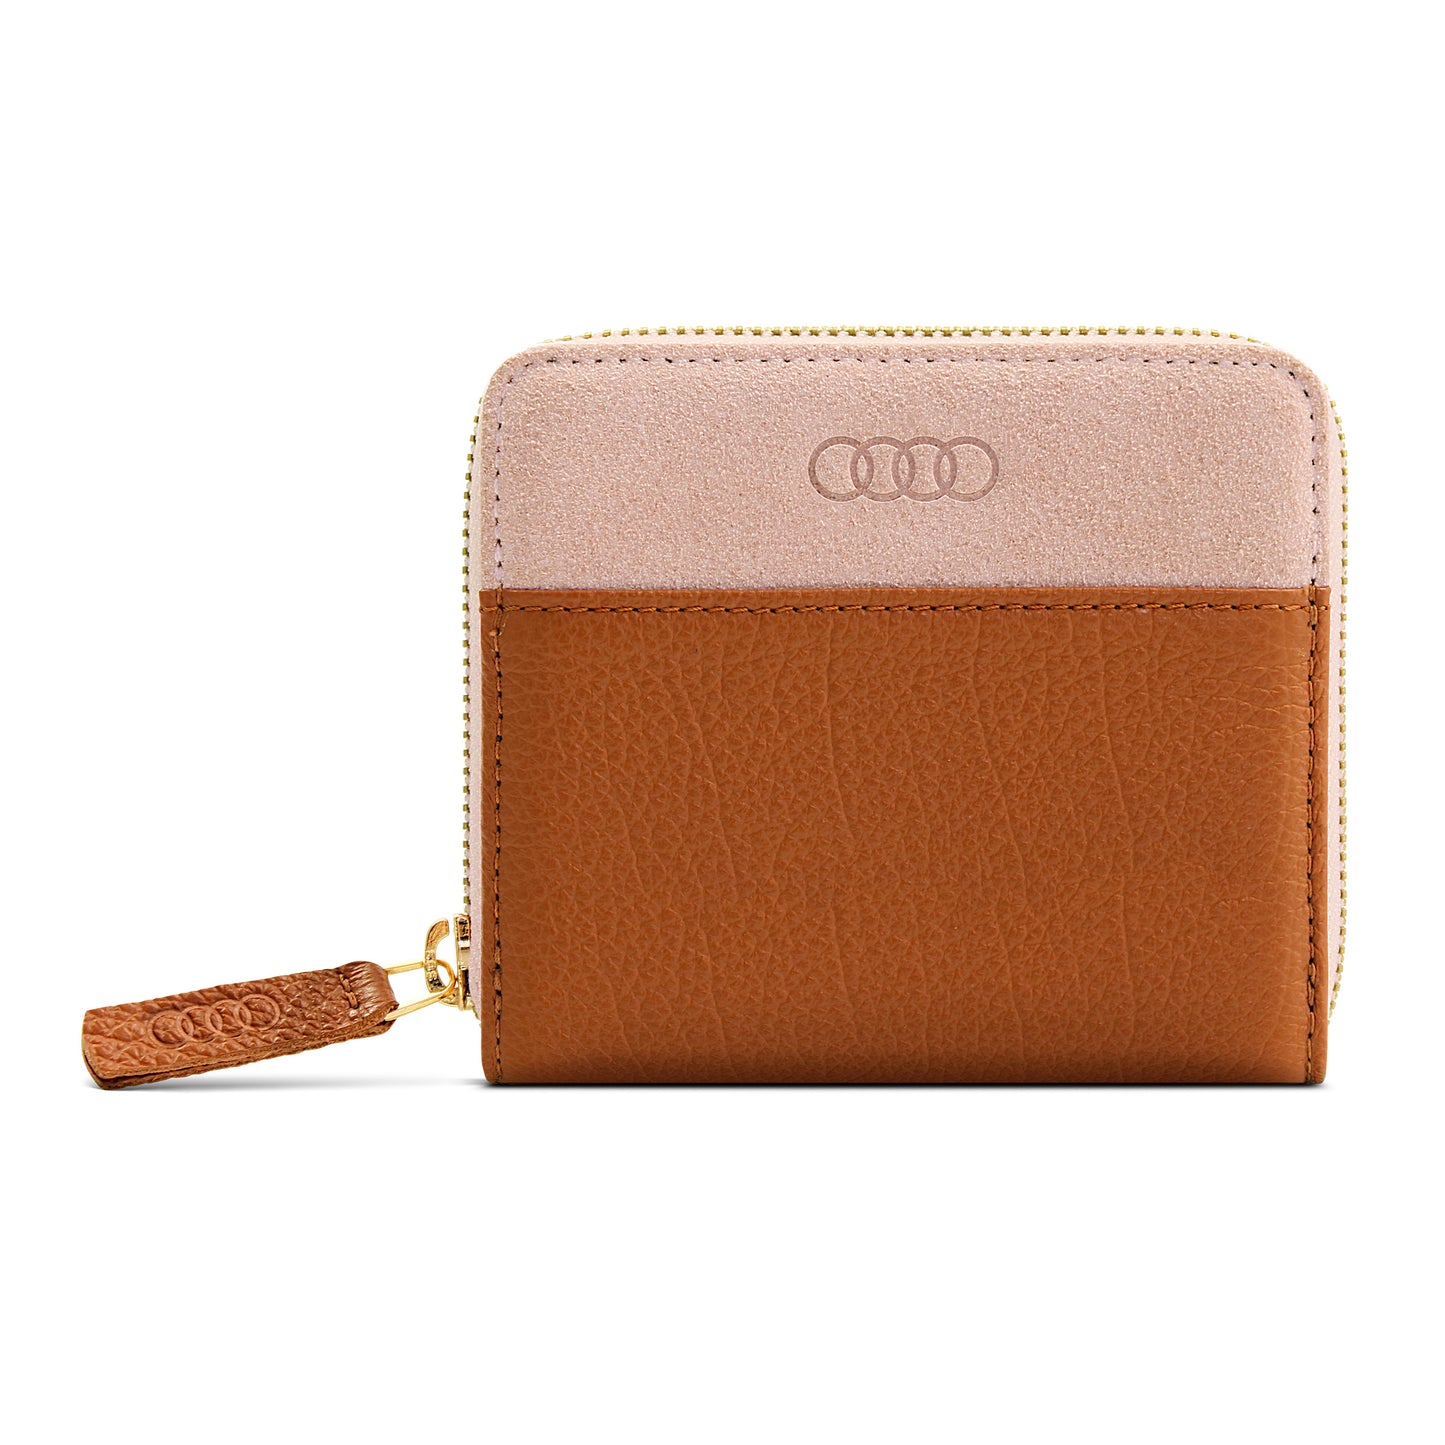 Audi Wallet leather small, womens, brown-rose